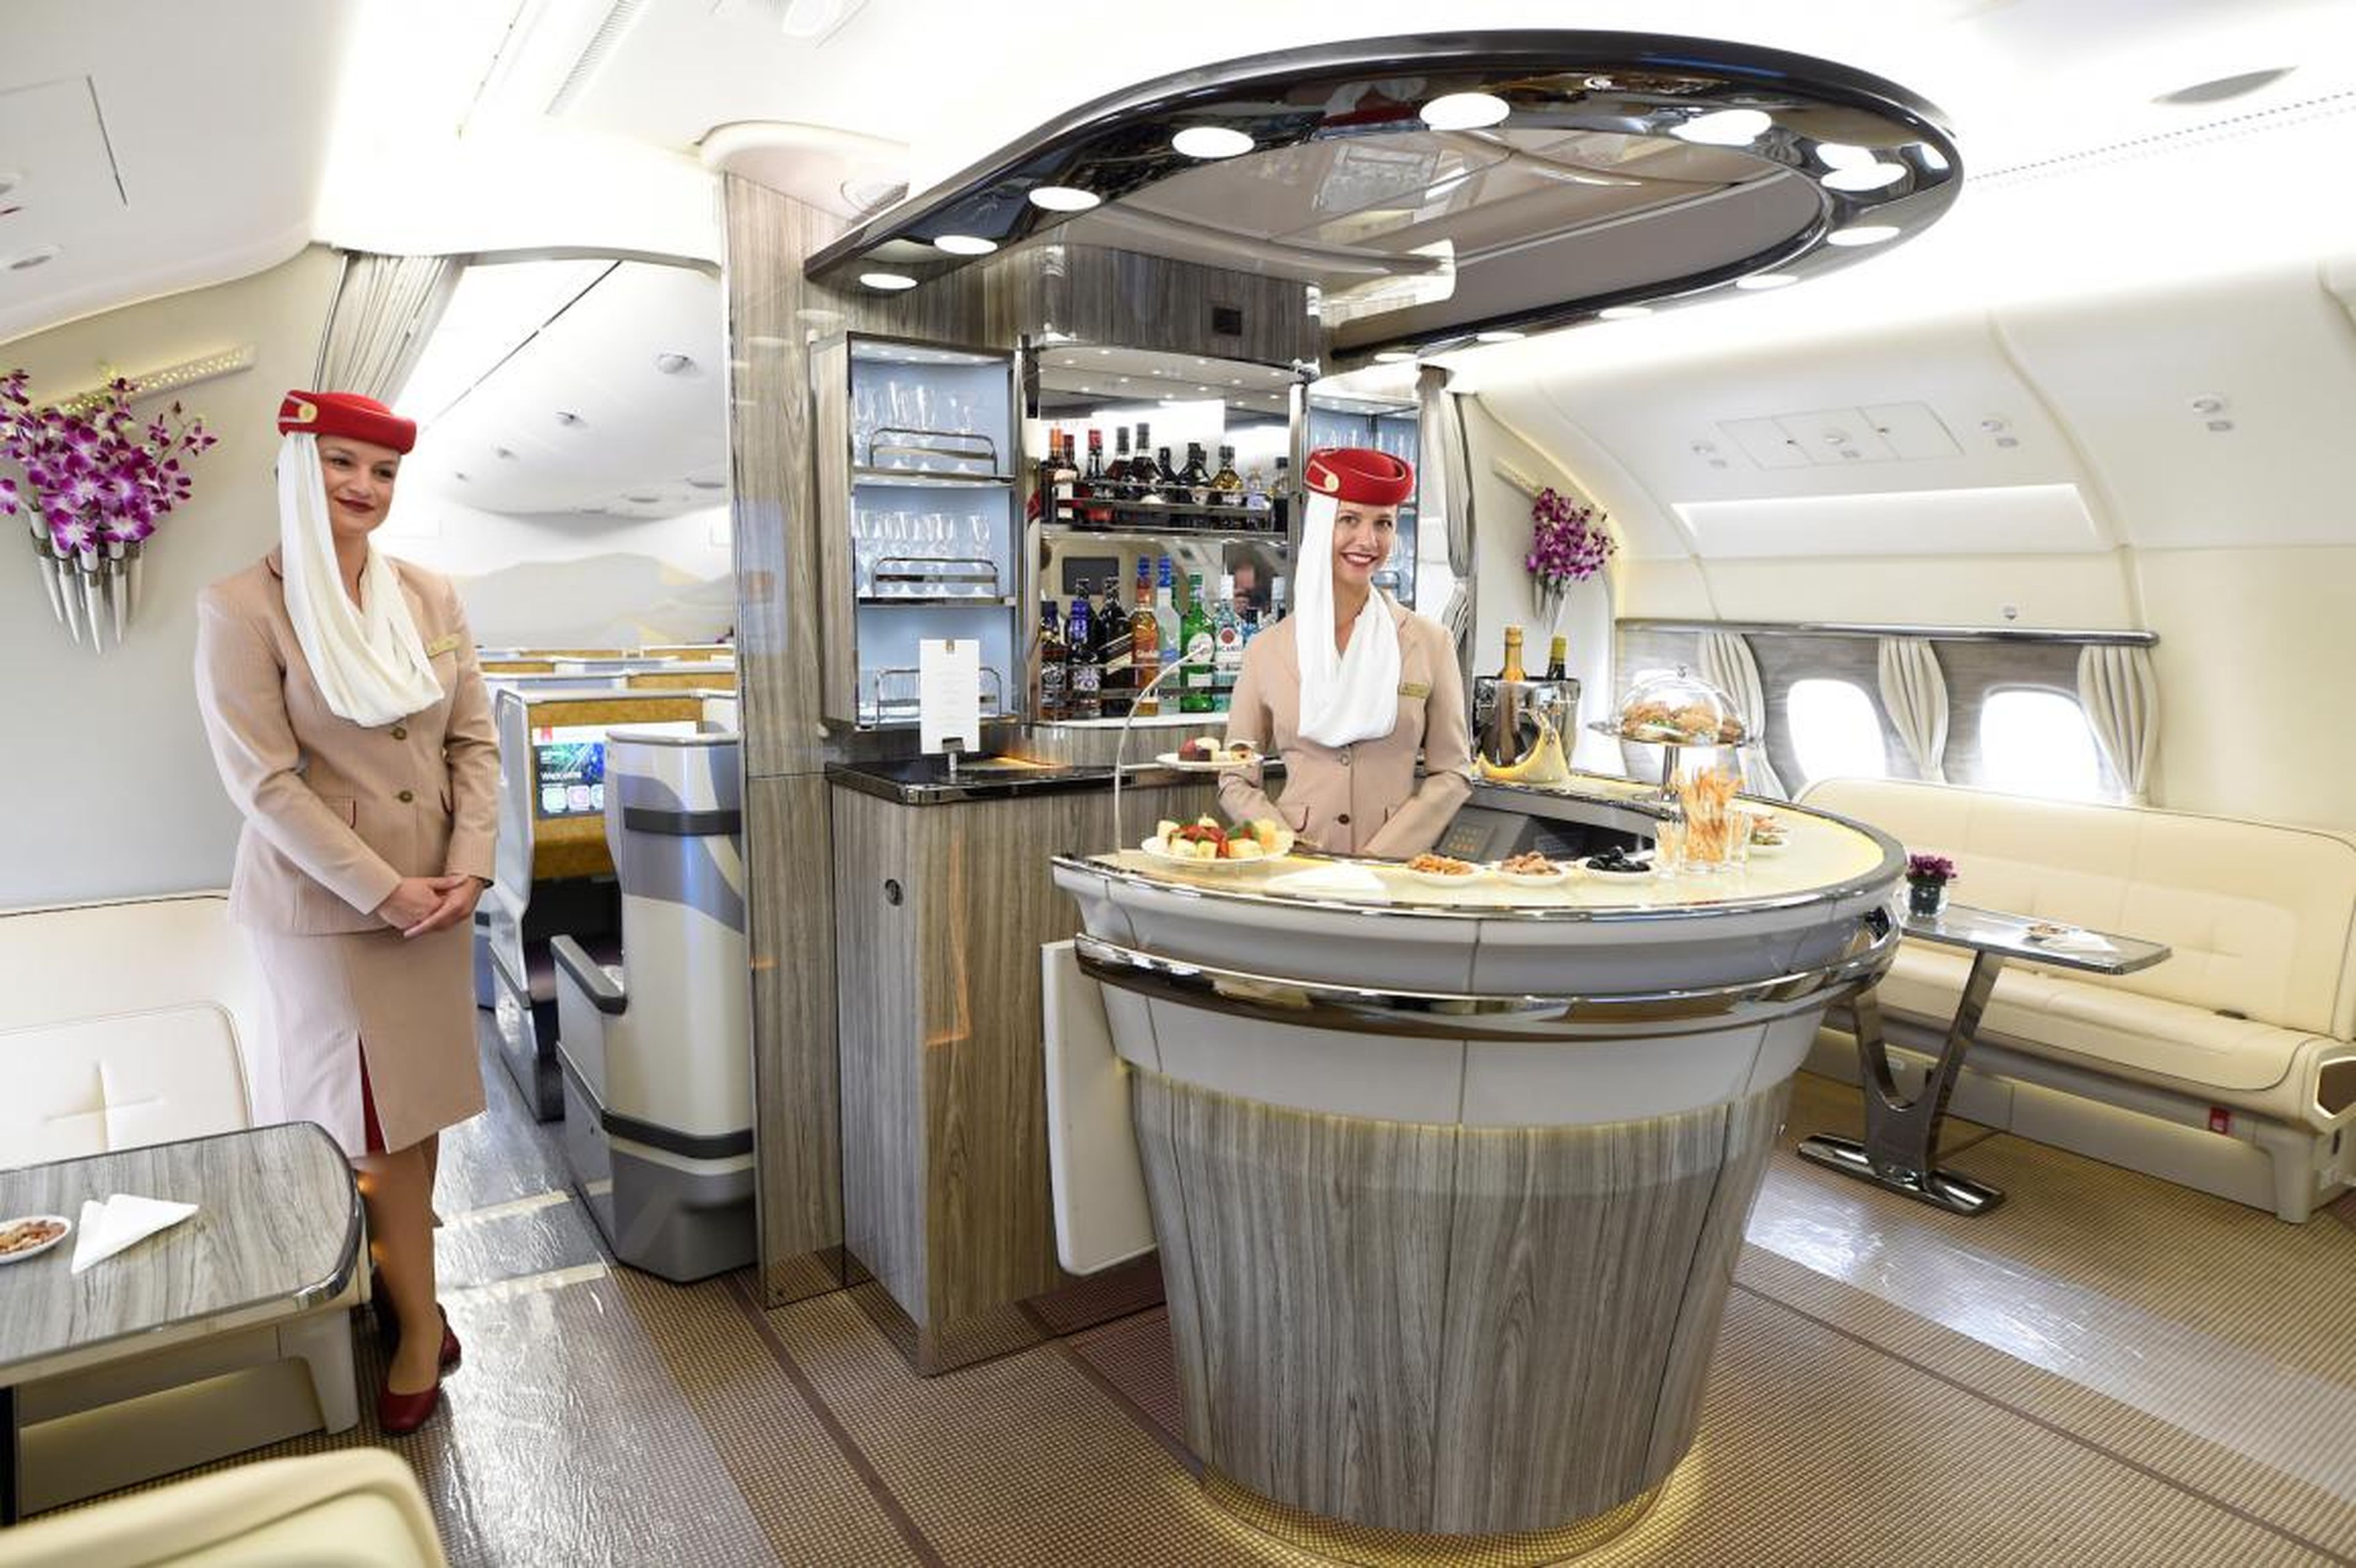 The Airbus jumbo delivered, at least to airlines that wanted to take advantage of luxurious options. Premium features, such as walk-up bars ...